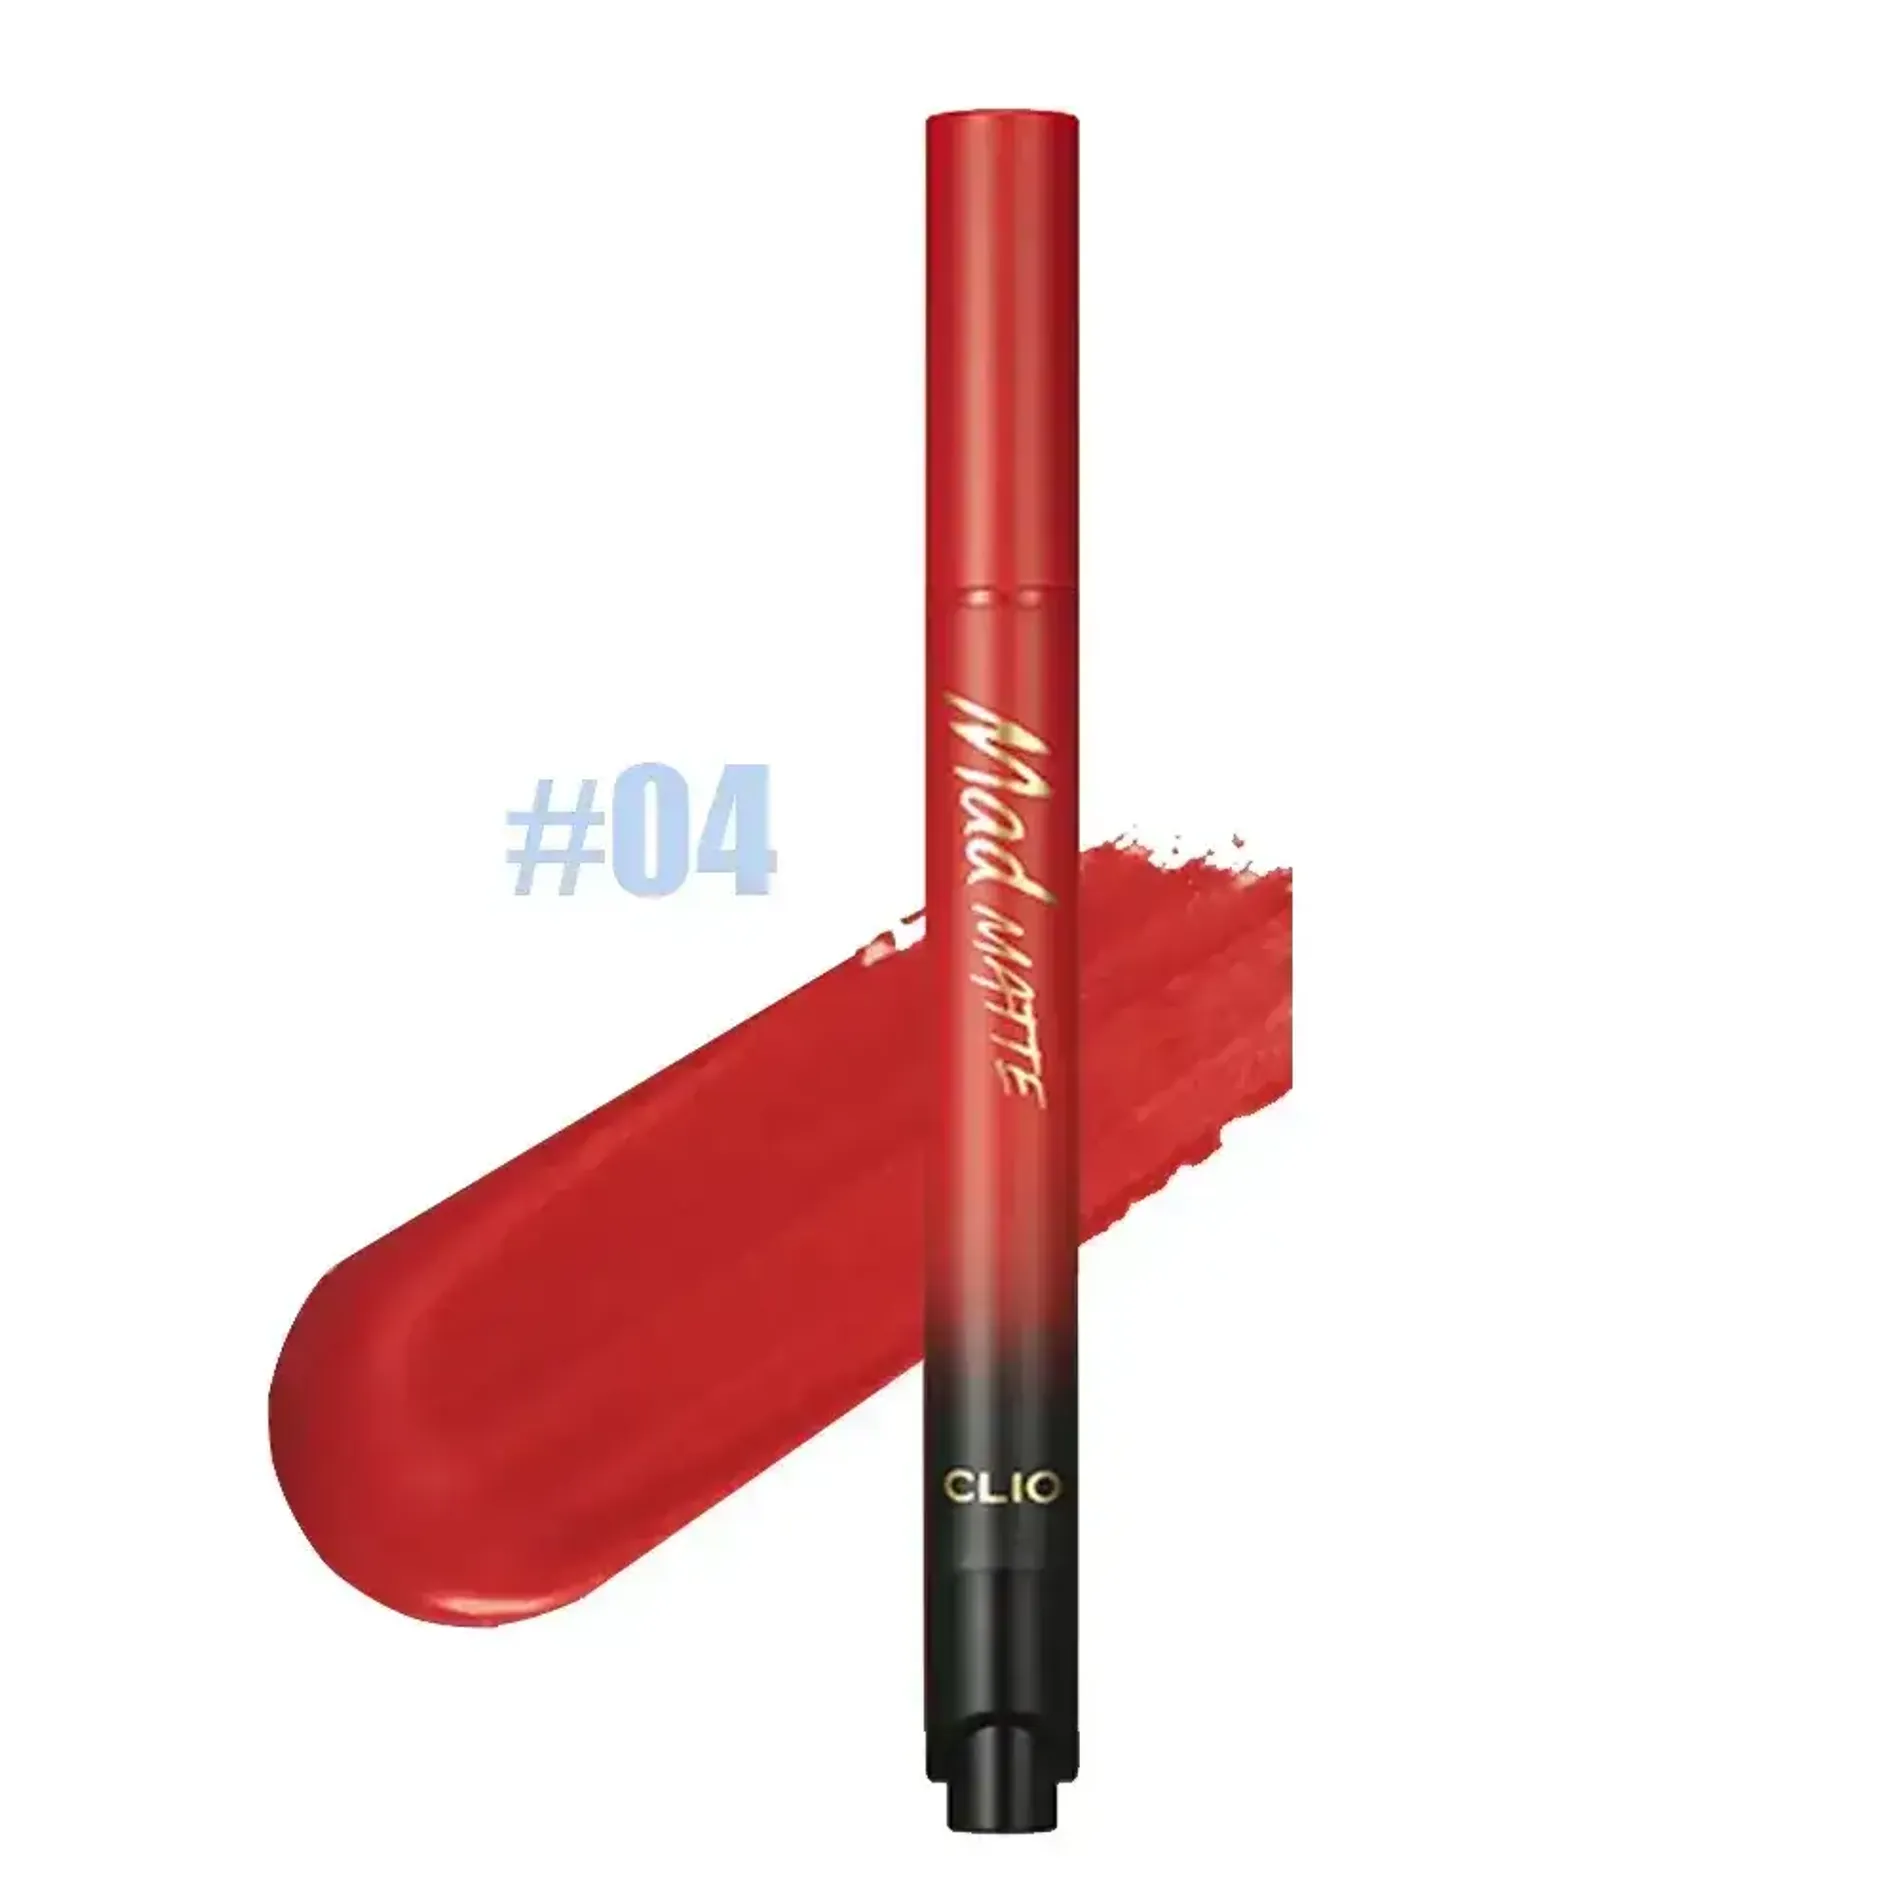 son-nuoc-dang-bam-clio-mad-matte-stain-tint-2g-6